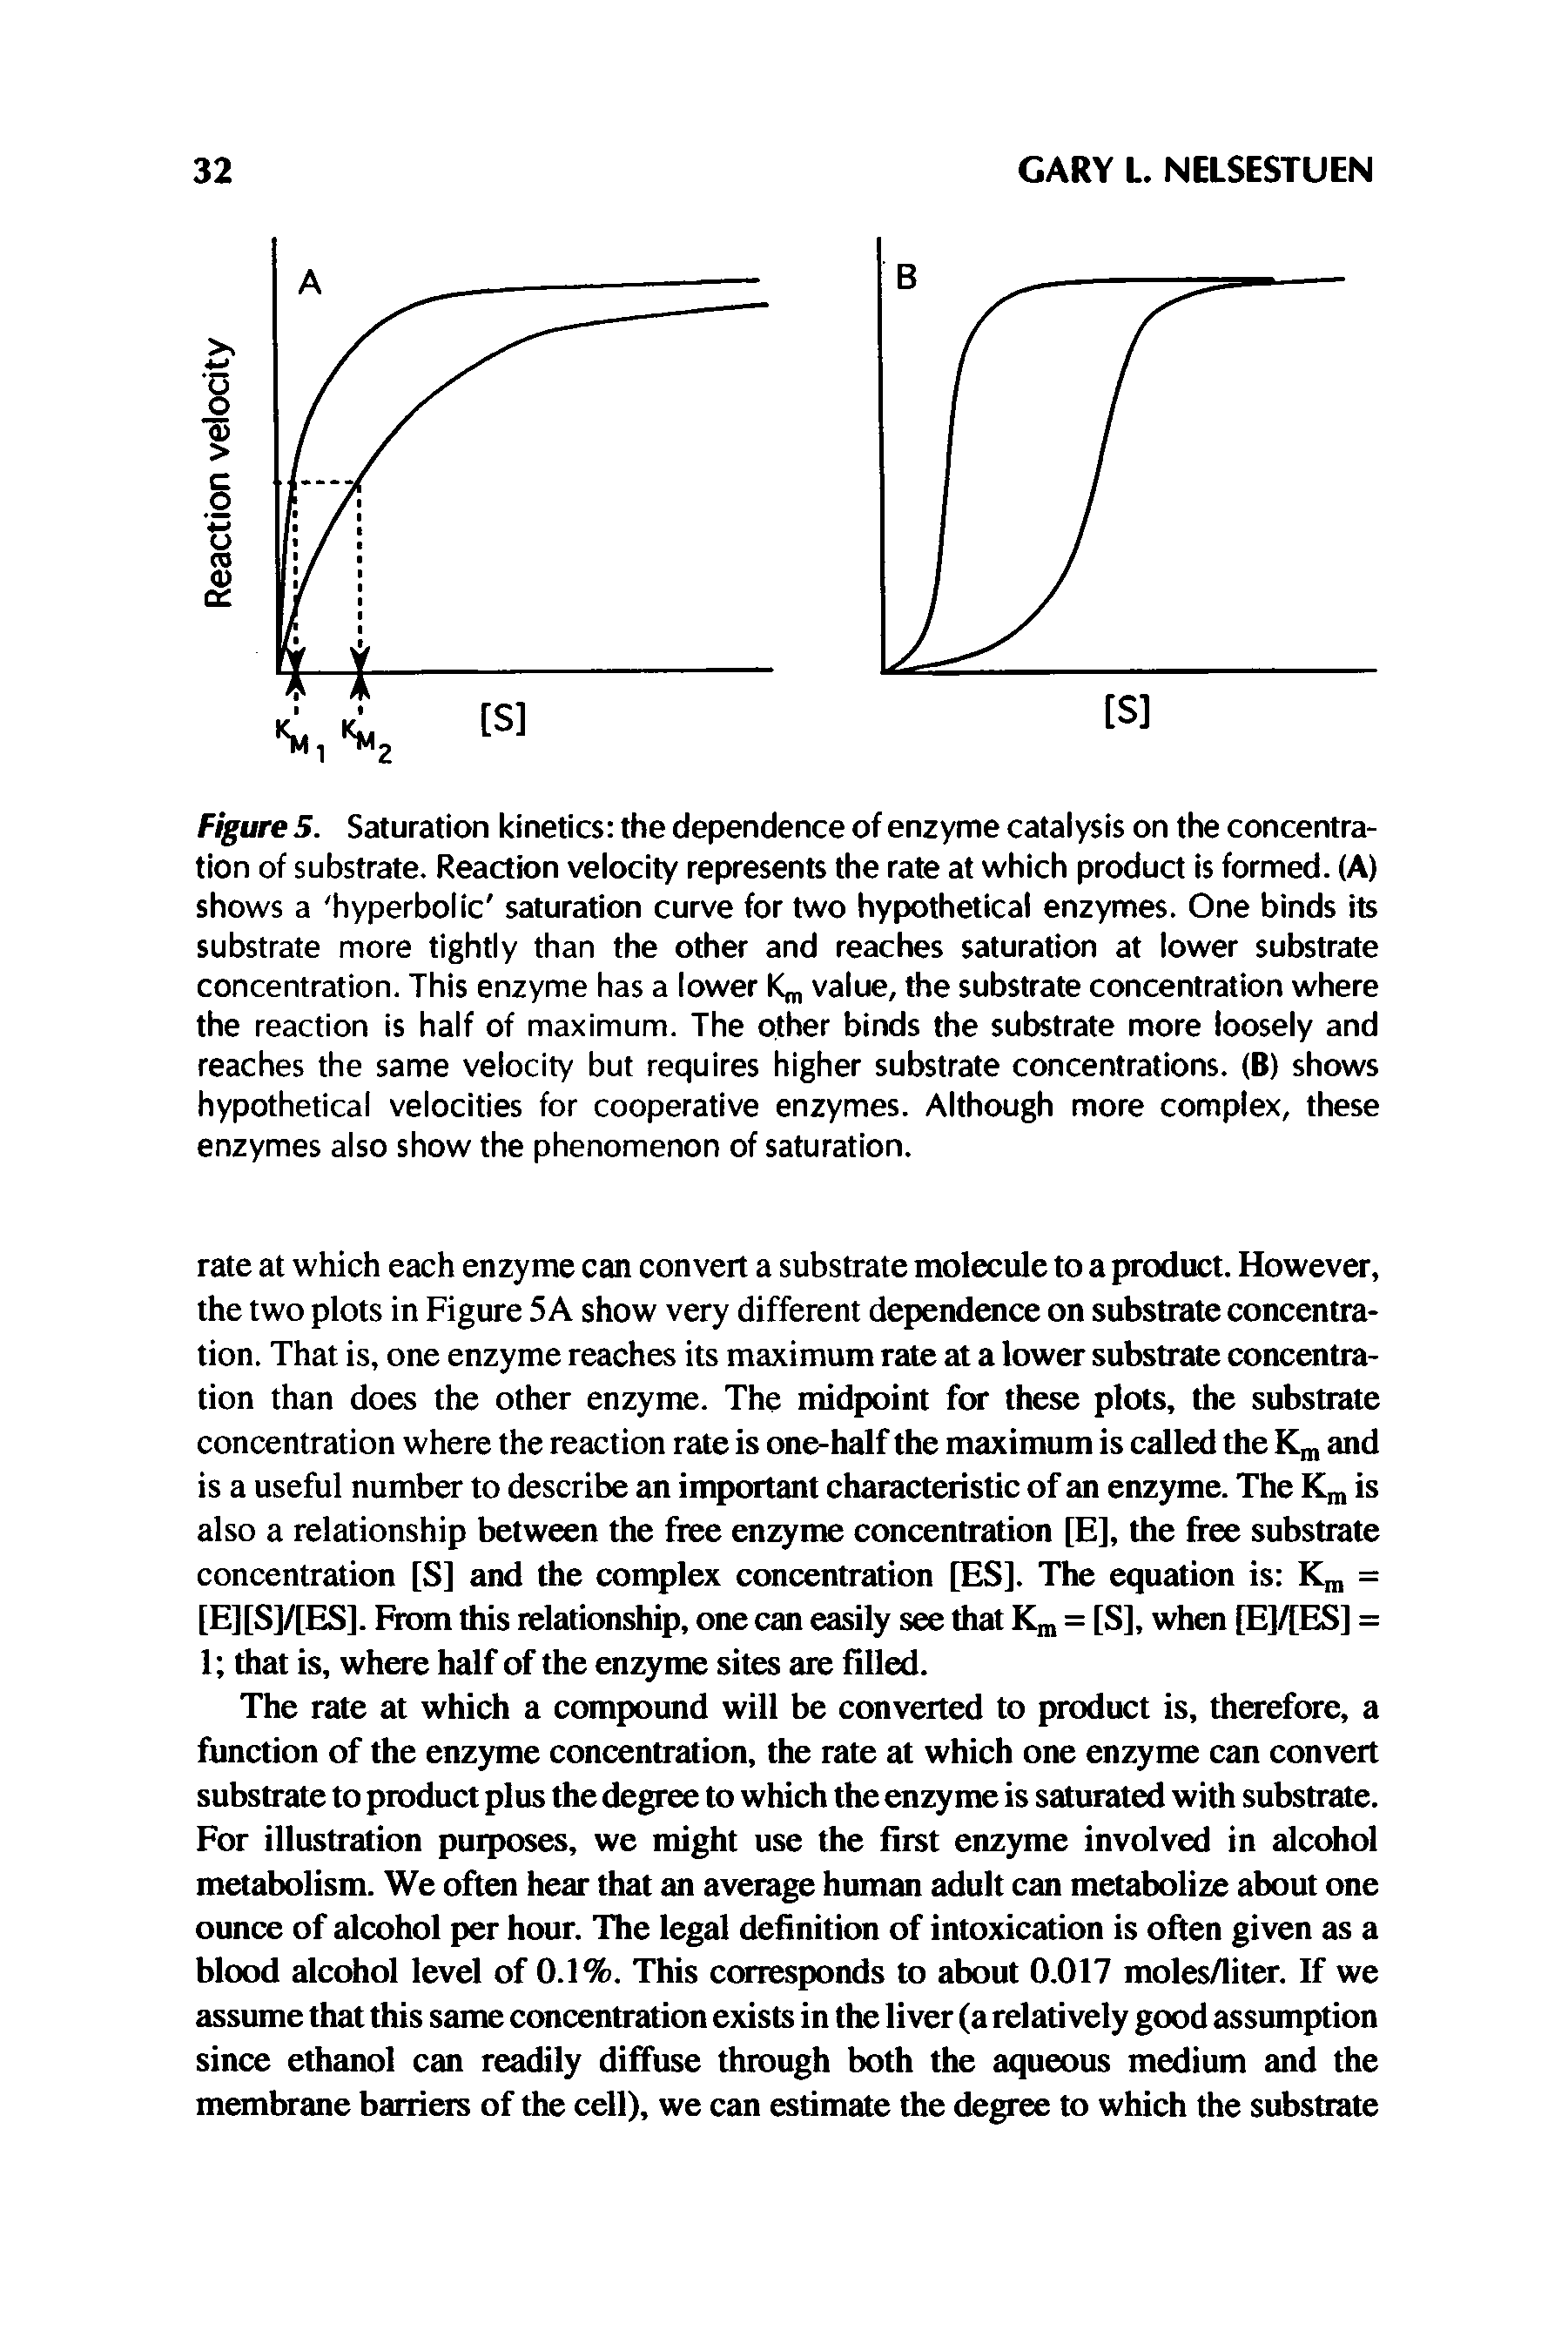 Figure 5. Saturation kinetics the dependence of enzyme catalysis on the concentration of substrate. Reaction velocity represents the rate at which product is formed. (A) shows a hyperbolic saturation curve for two hypothetical enzymes. One binds its substrate more tightly than the other and reaches saturation at lower substrate concentration. This enzyme has a lower value, the substrate concentration where the reaction is half of maximum. The other binds the substrate more loosely and reaches the same velocity but requires higher substrate concentrations. (B) shows hypothetical velocities for cooperative enzymes. Although more complex, these enzymes also show the phenomenon of saturation.